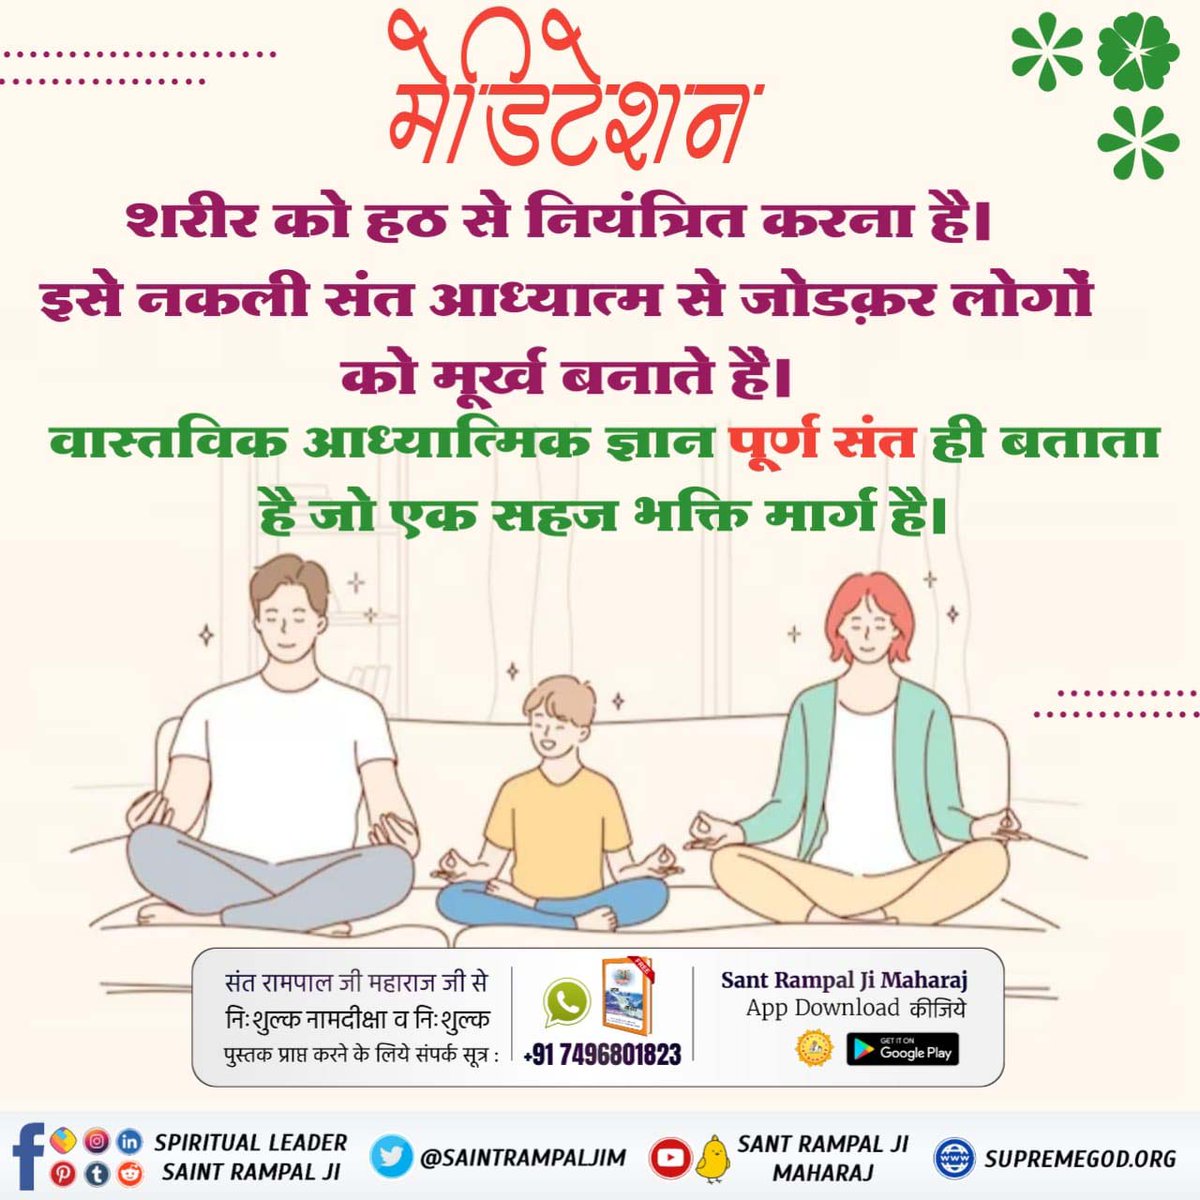 #What_Is_Meditation
Today, crores of people are living a happy life. All the benefits are derived from the scripture-based devotion preached by Sant Rampal Ji Maharaj.
Sant Rampal Ji Maharaj